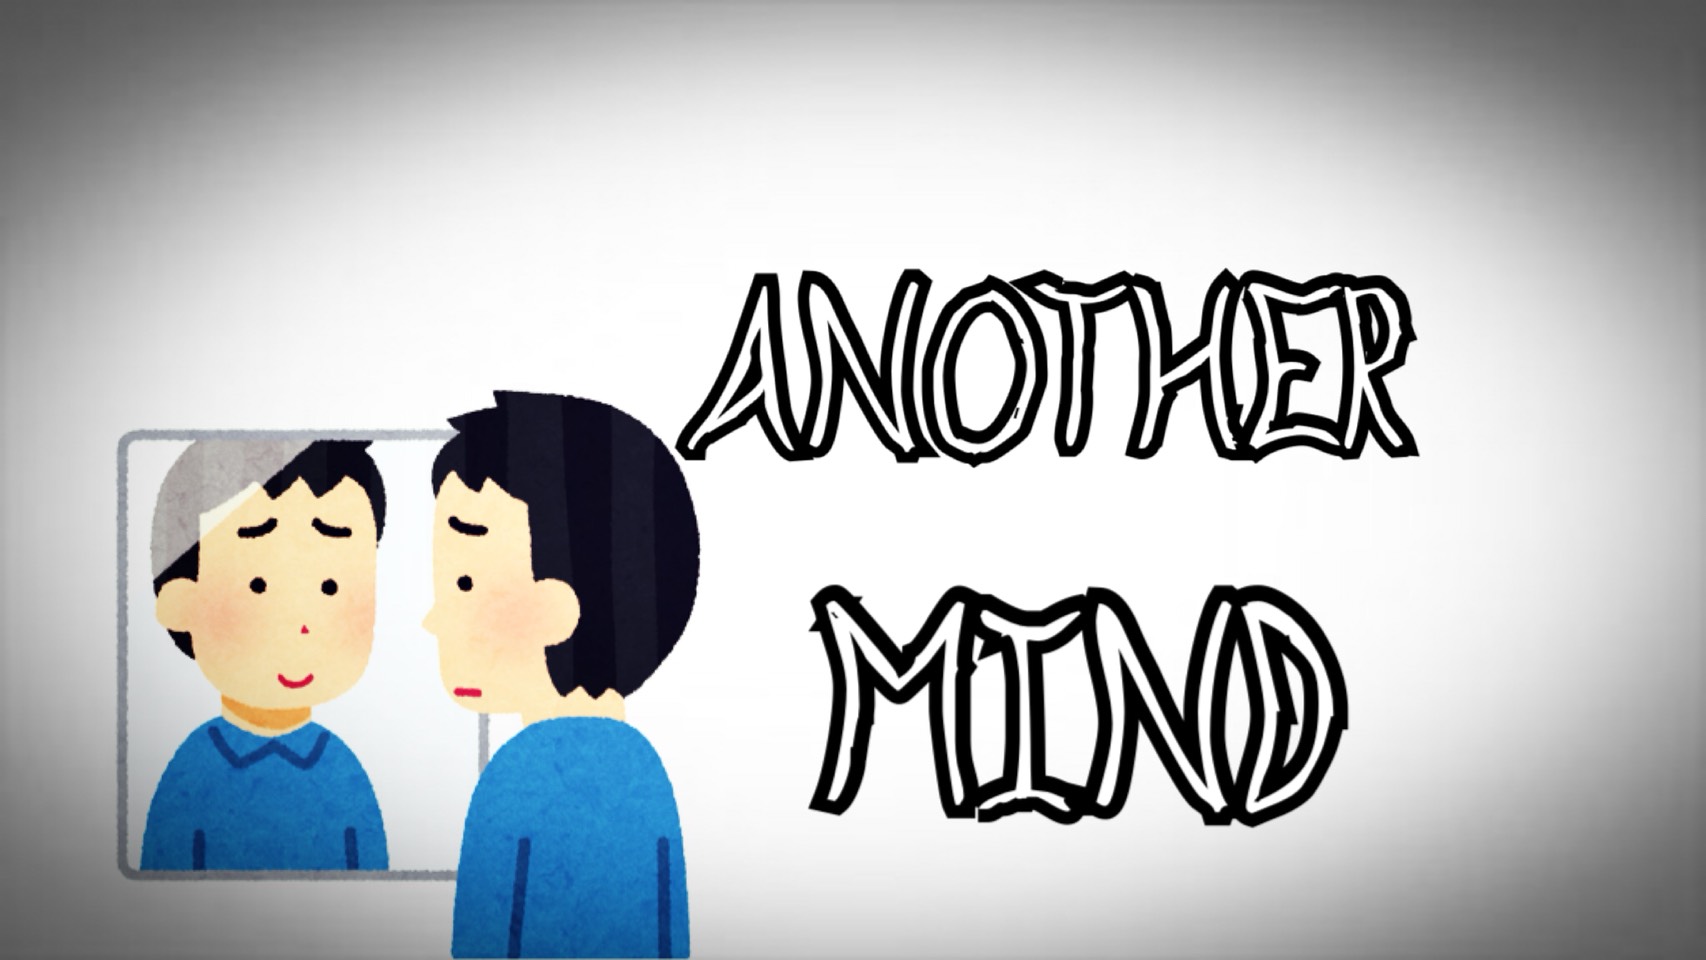 「Another Mind」のイメージ